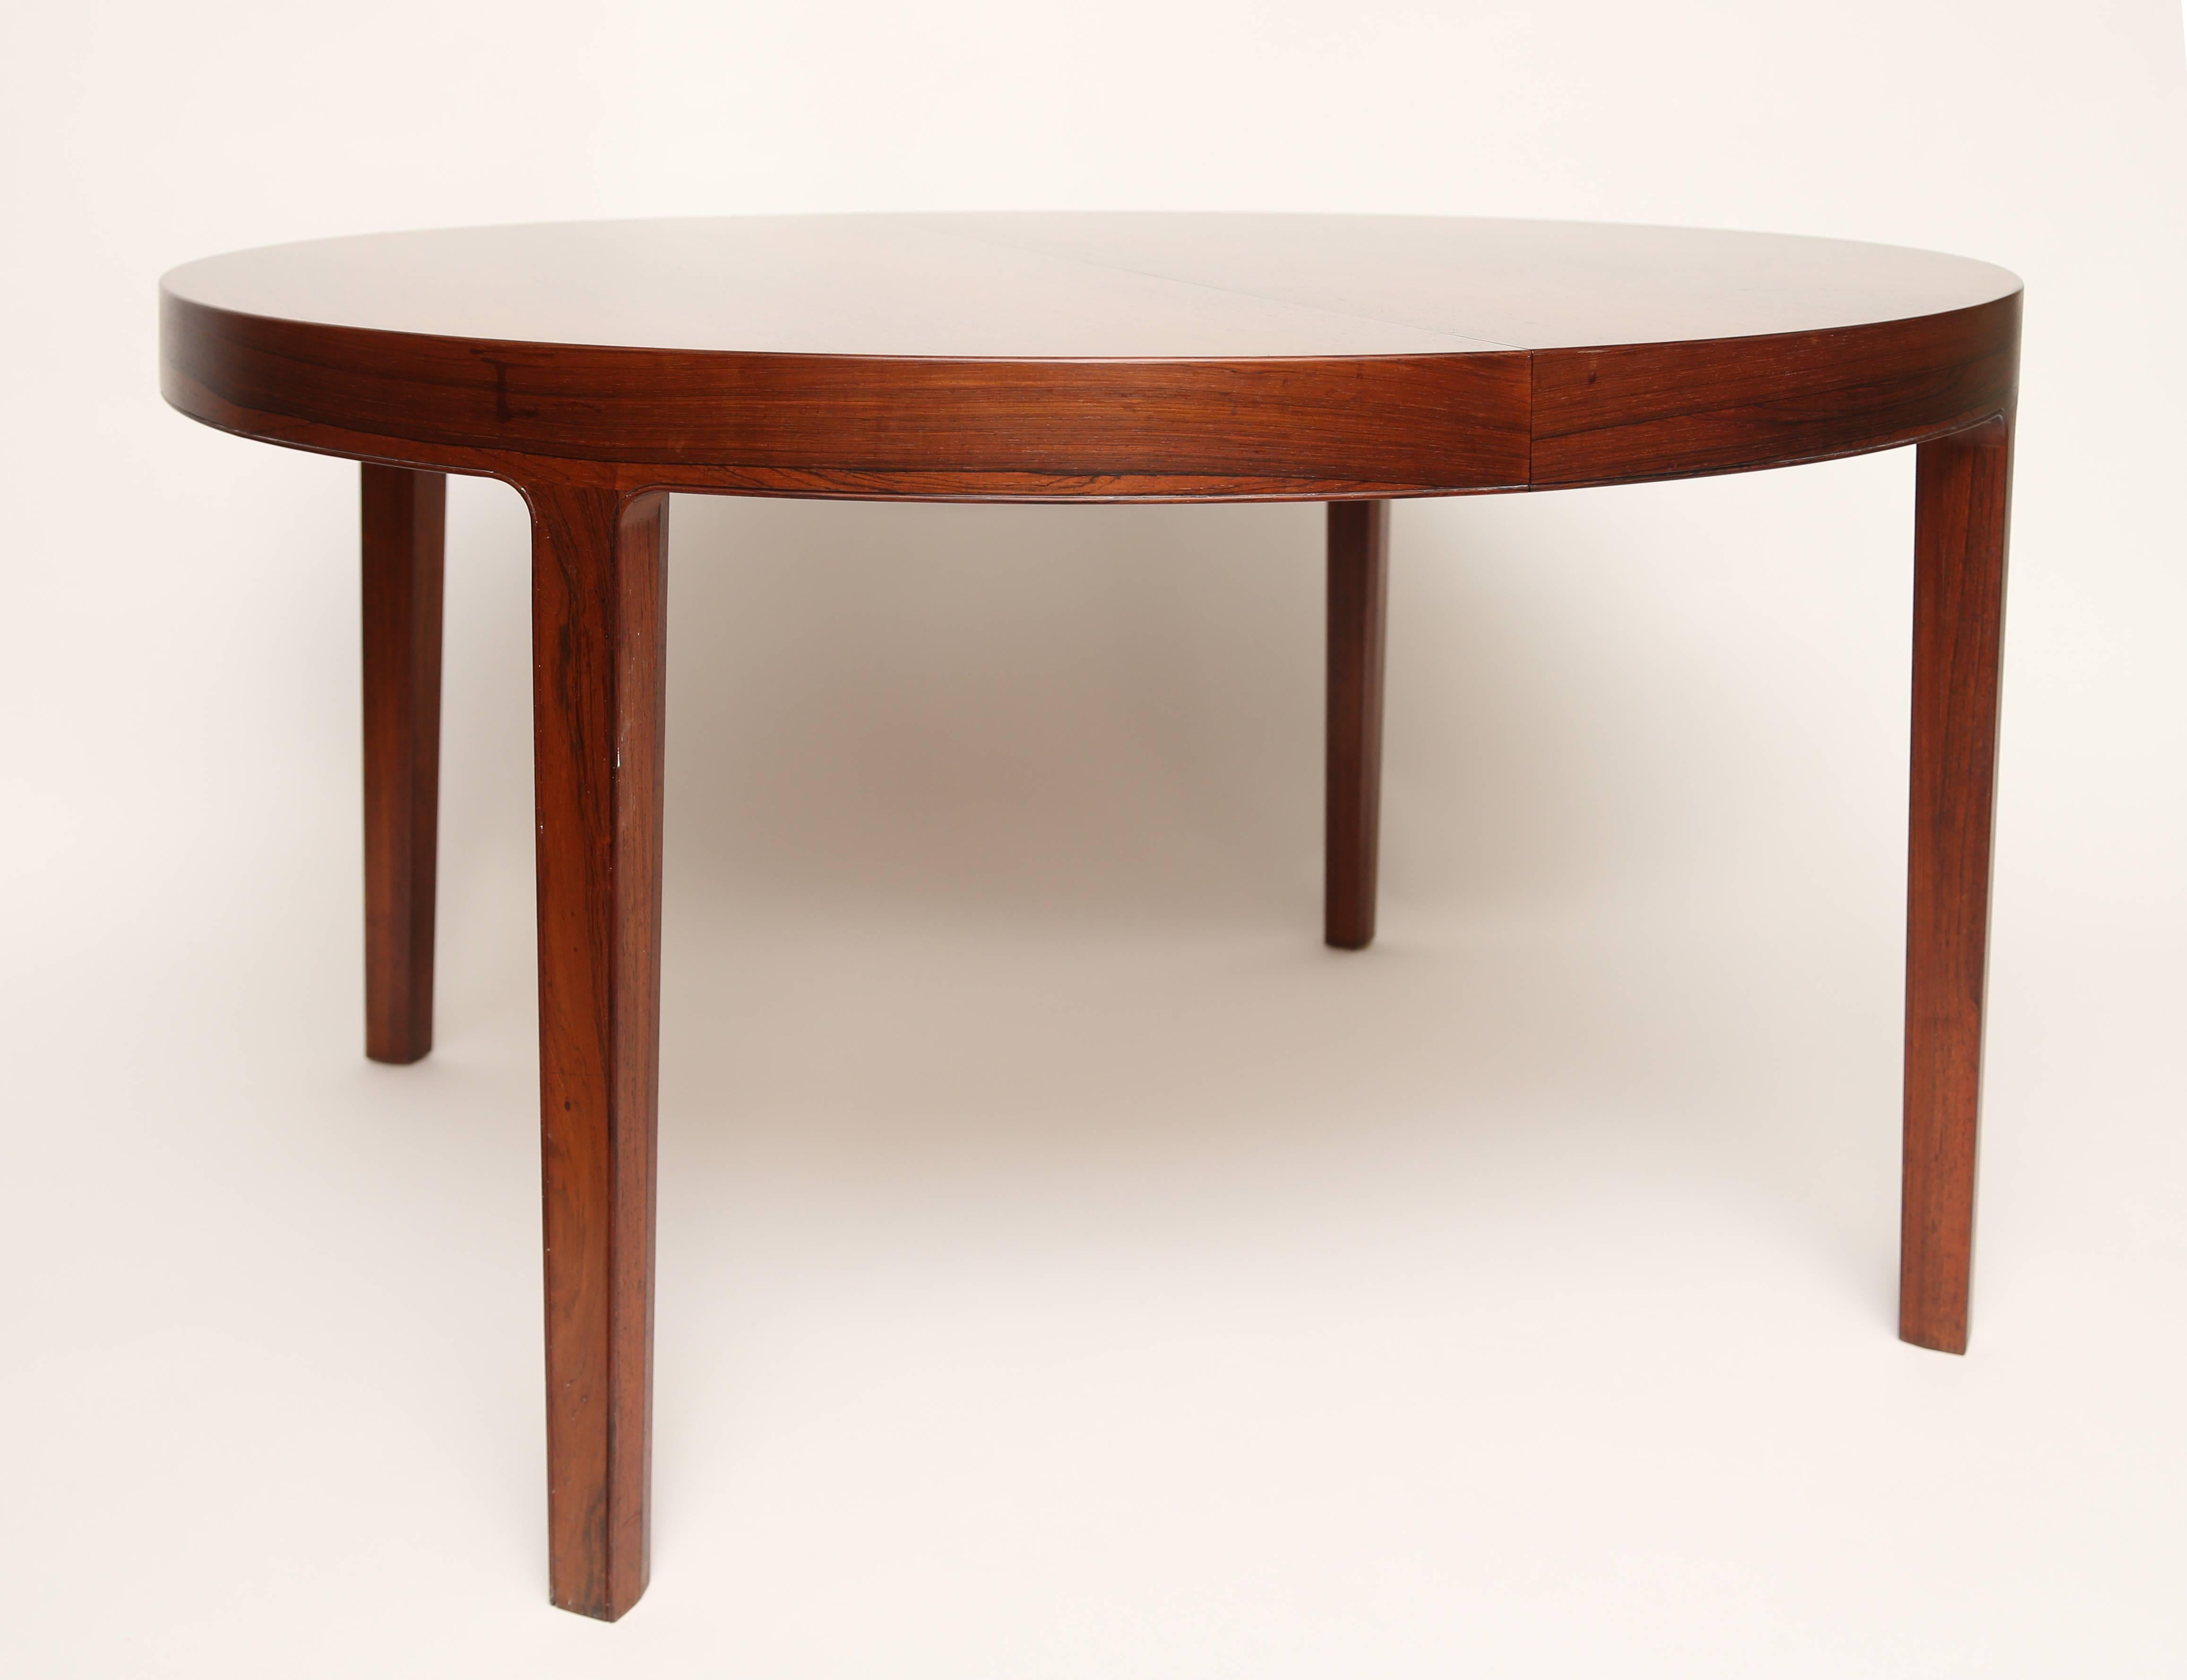 Beautiful and simple rosewood table
Exquisite detail. Comes with a leaf.
 